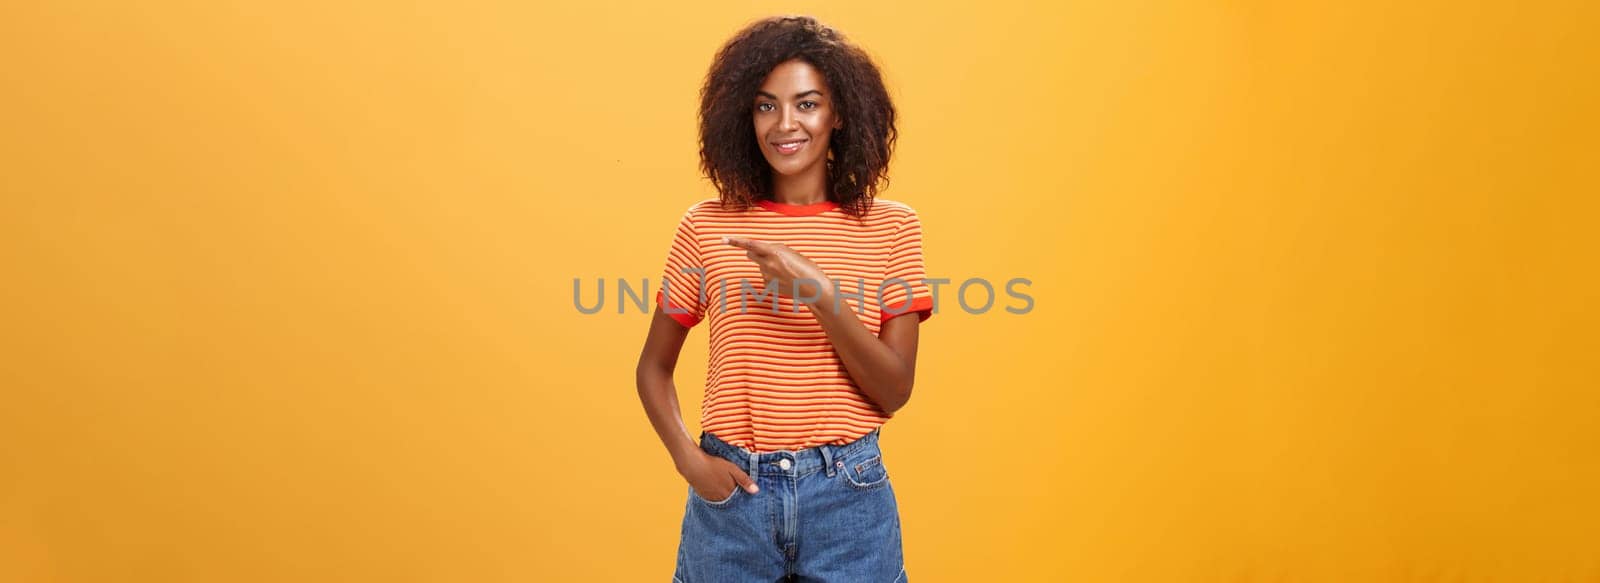 Showing perfect place for advertising. Charming carefree and confident young stylish african-american woman with afro hairstyle holding hand in pocket casually pointing right over orange wall.